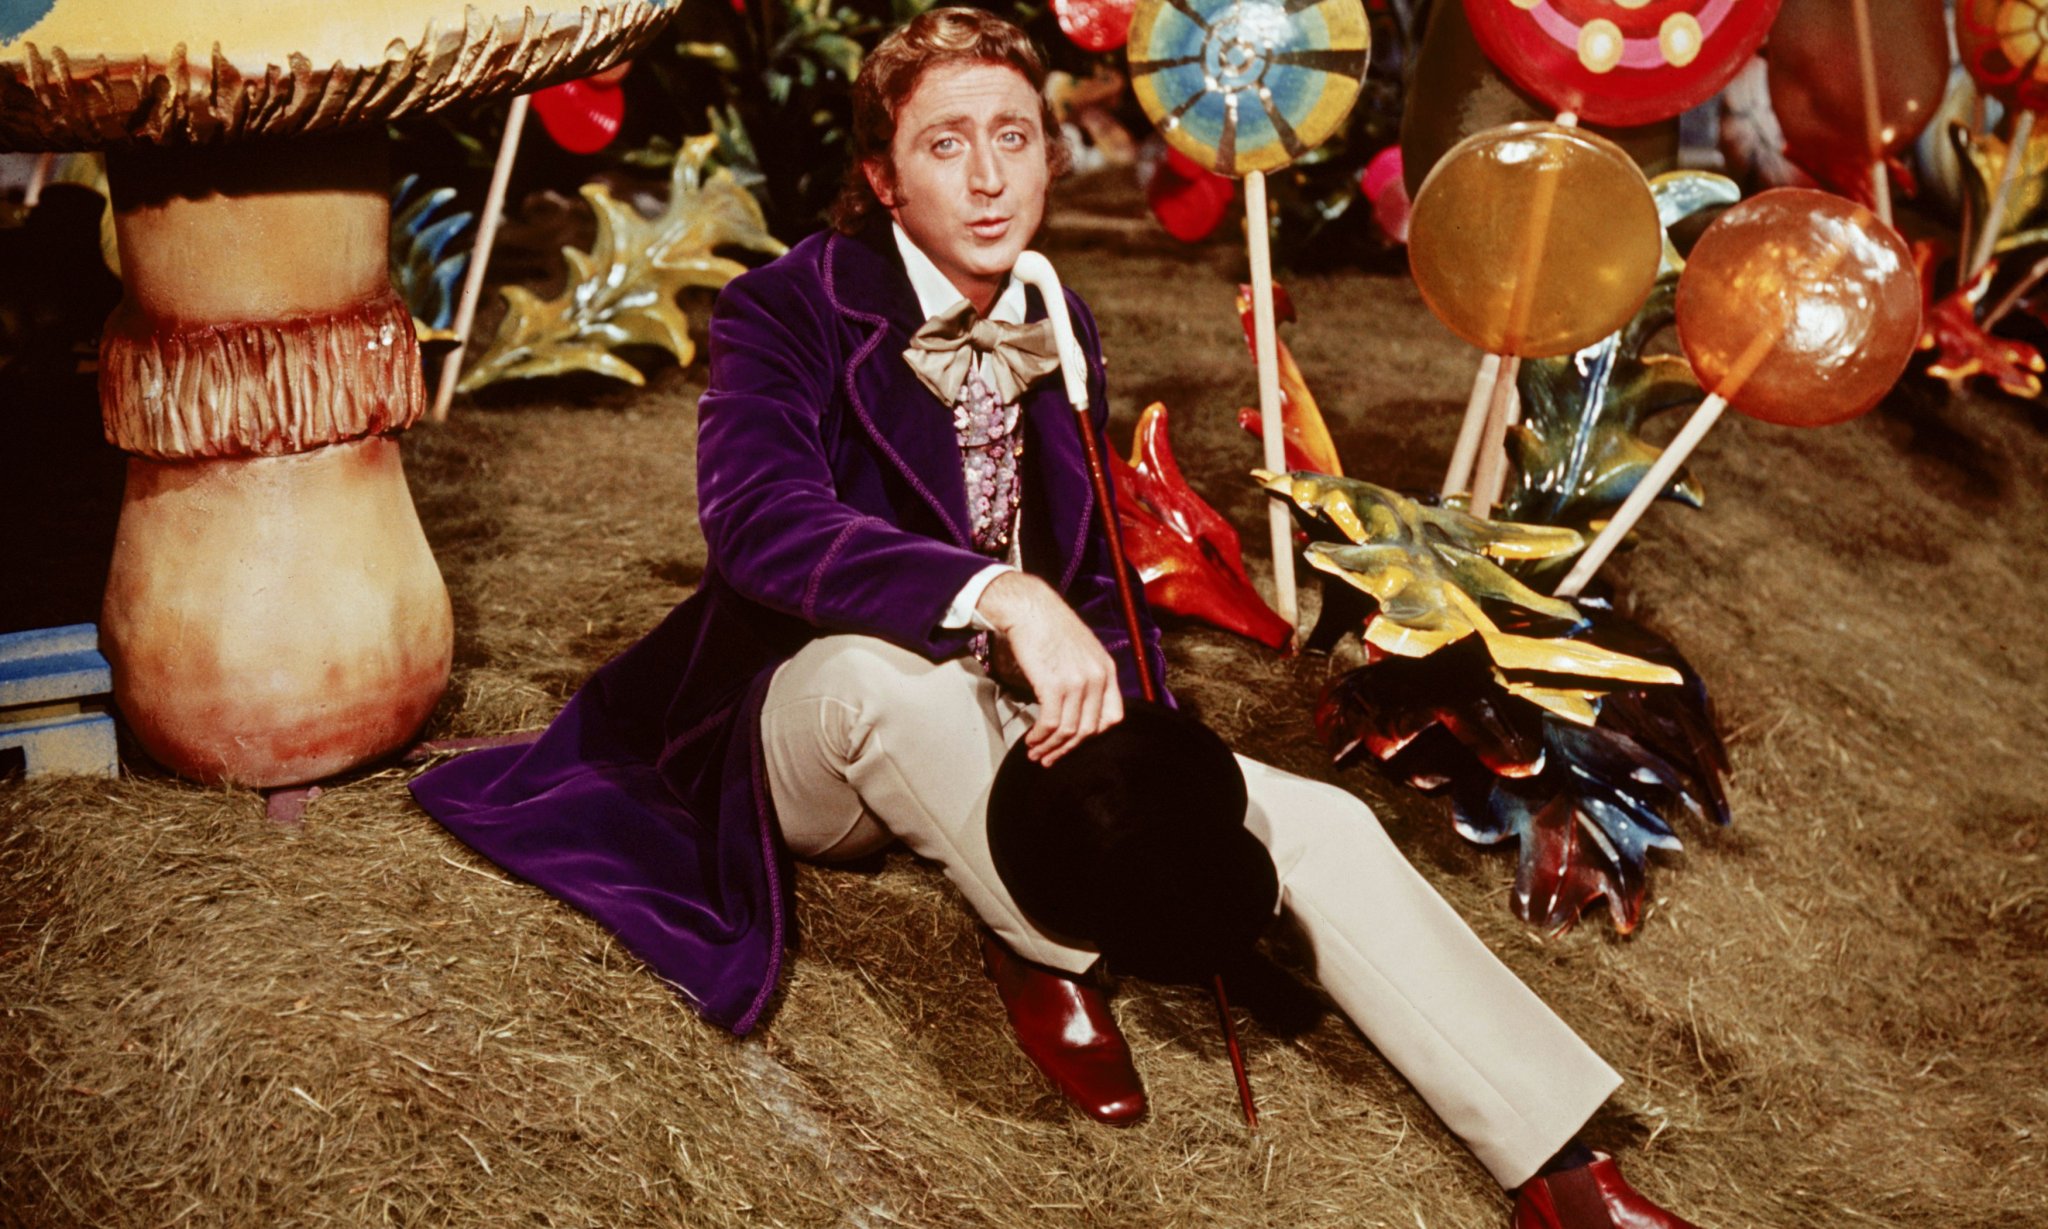 Willy Wonka and the Chocolate Factory at 50: a clunky film that Roald Dahl rightly hated